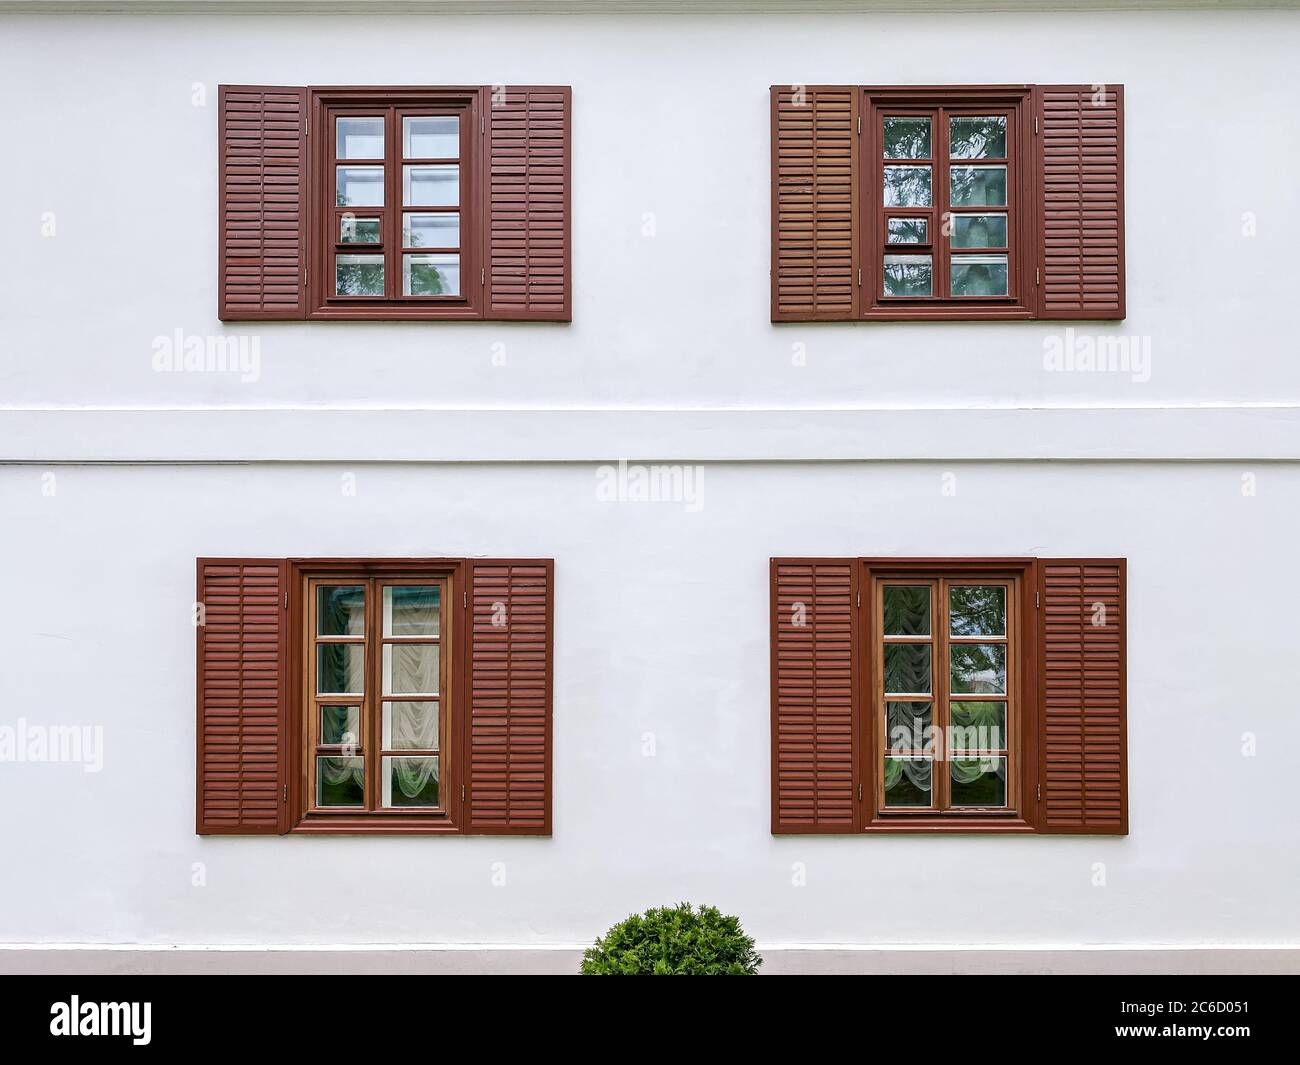 white exterior plaster wall with painted brown windows and wooden shutters Stock Photo